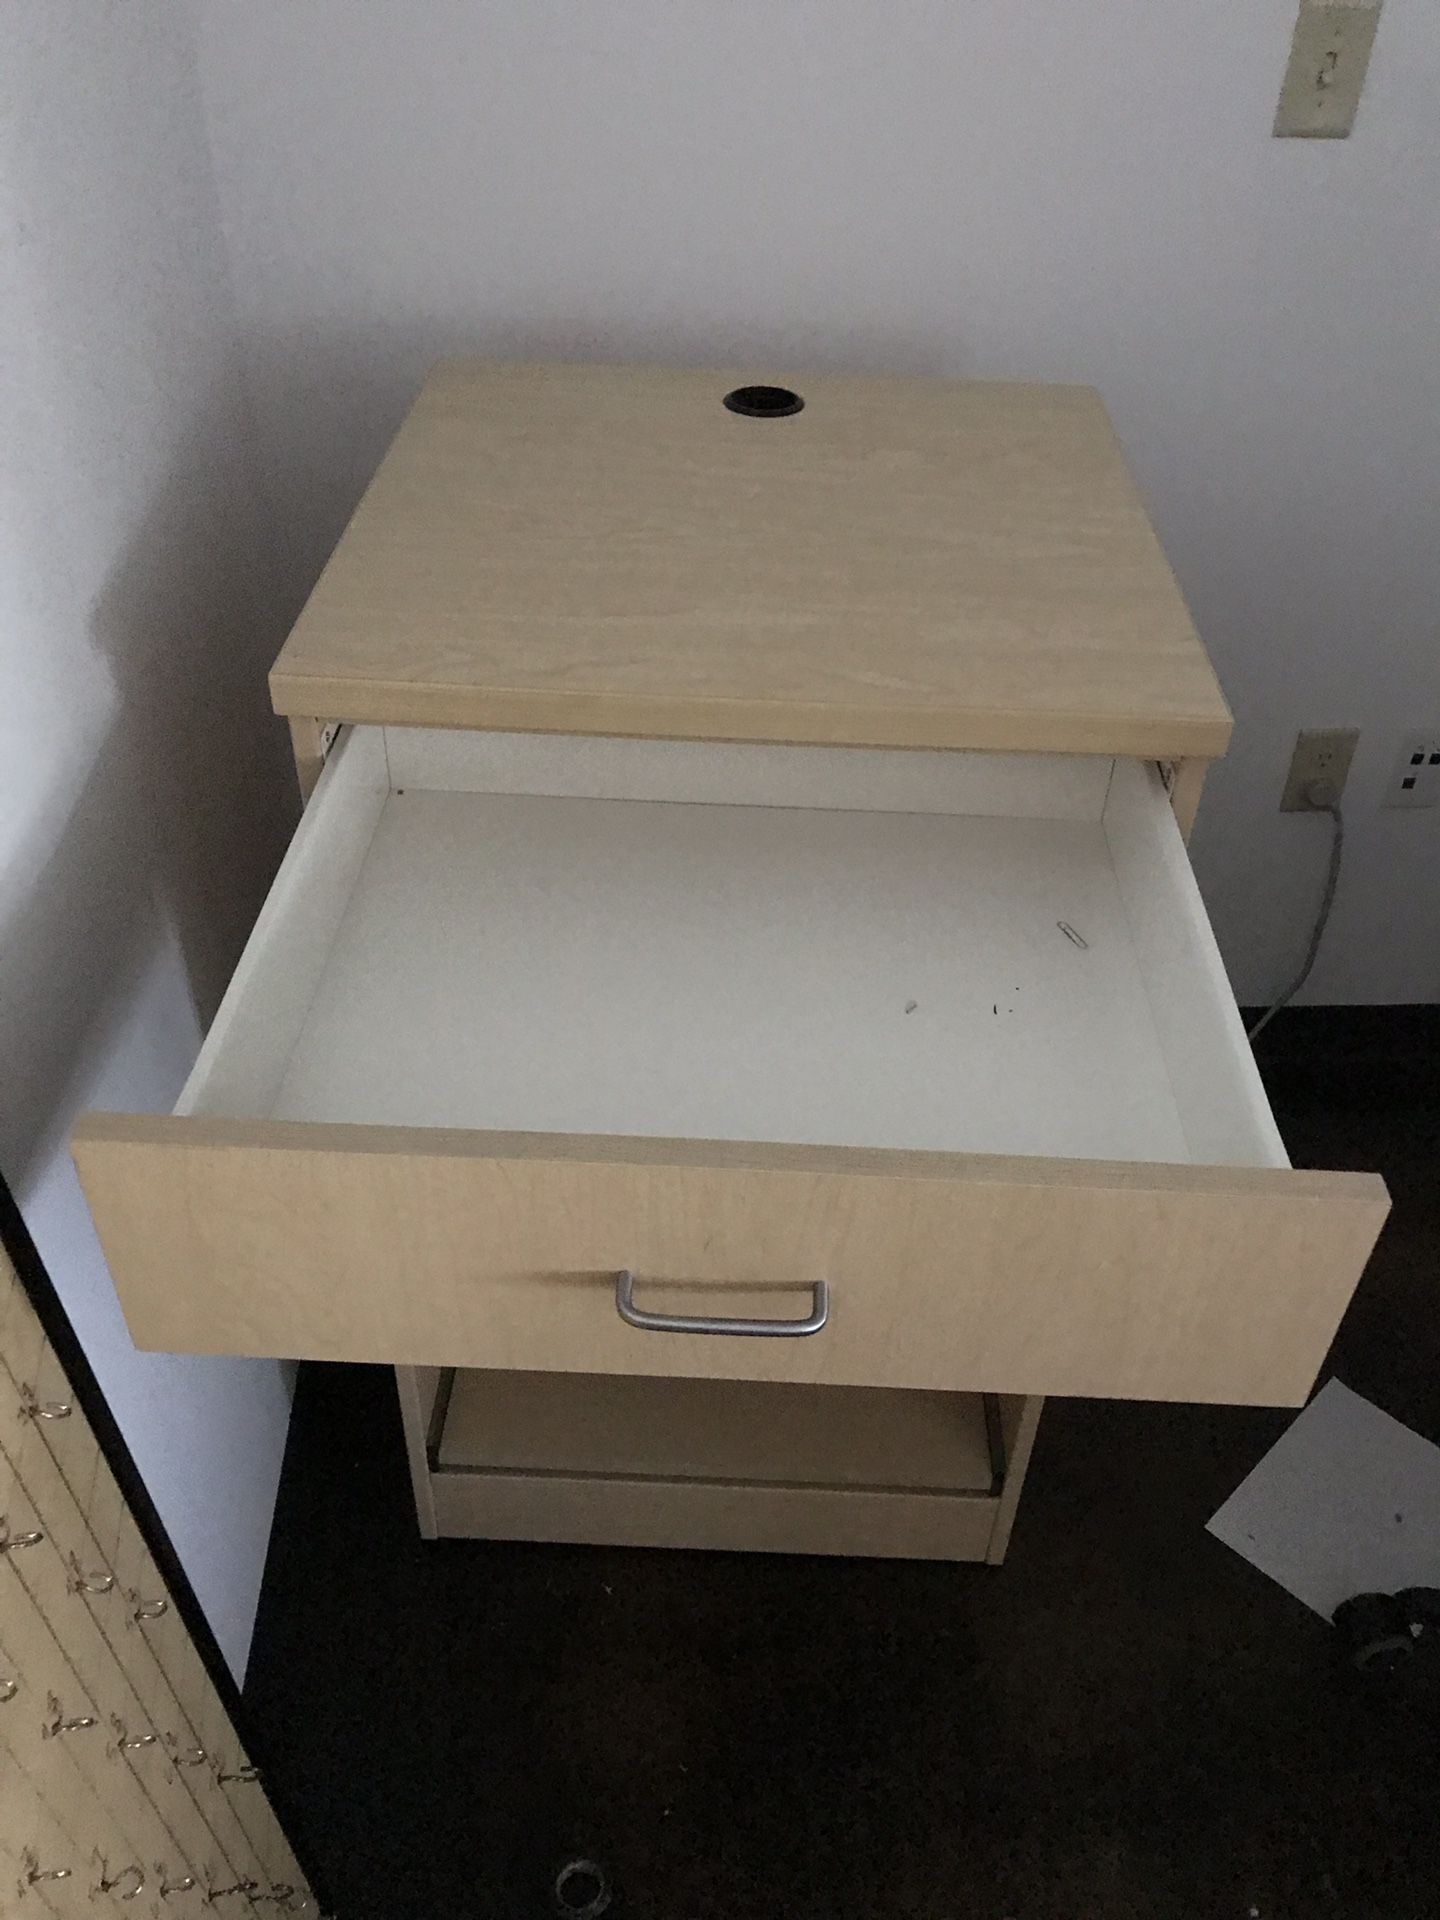 Printer station with drawer and paper storage